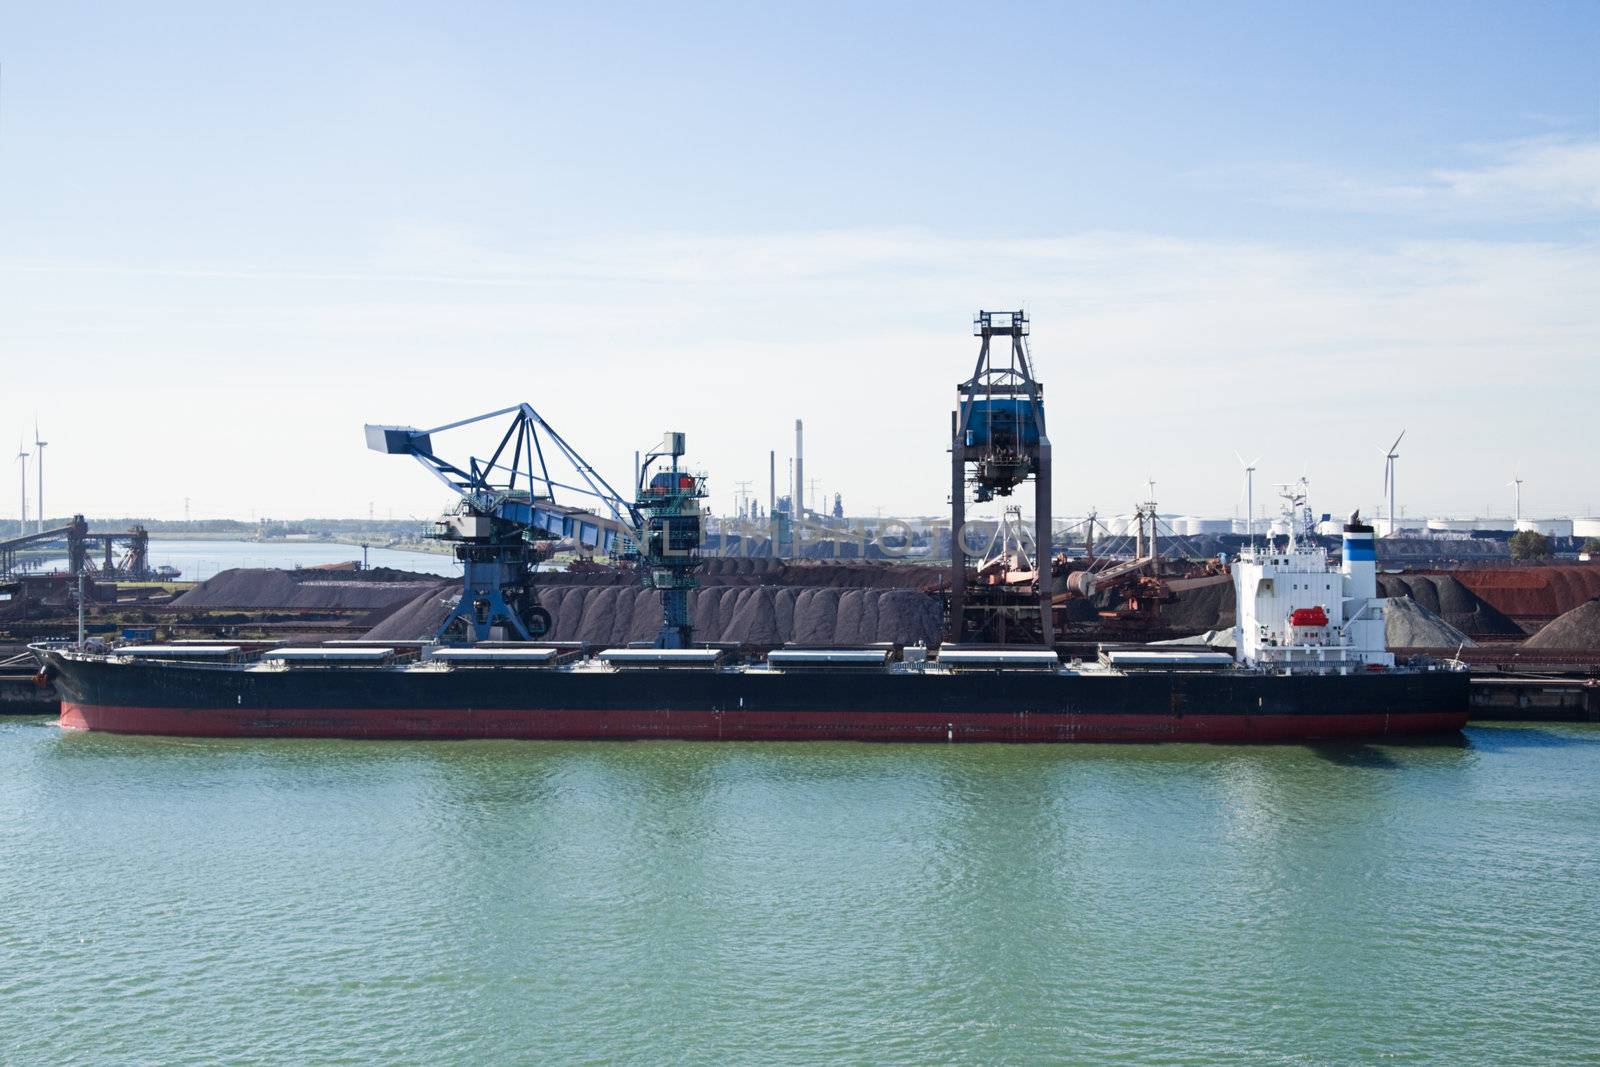 Bauxite transshipment in Rotterdam port by Colette